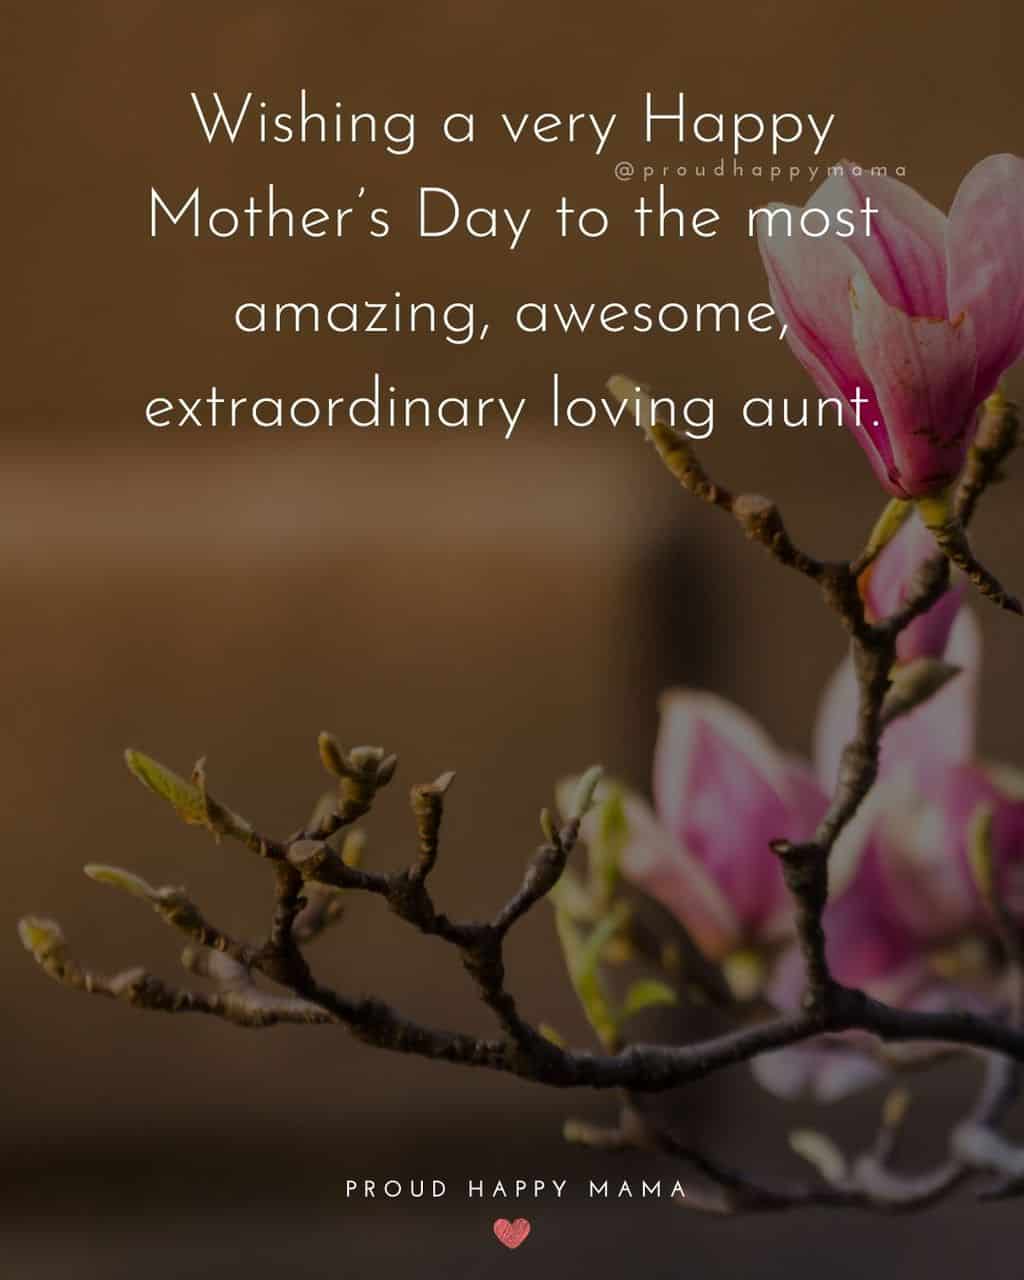 Happy Mothers Day Aunt - Wishing a very Happy Mothers Day to the most amazing, awesome, extraordinary loving aunt.